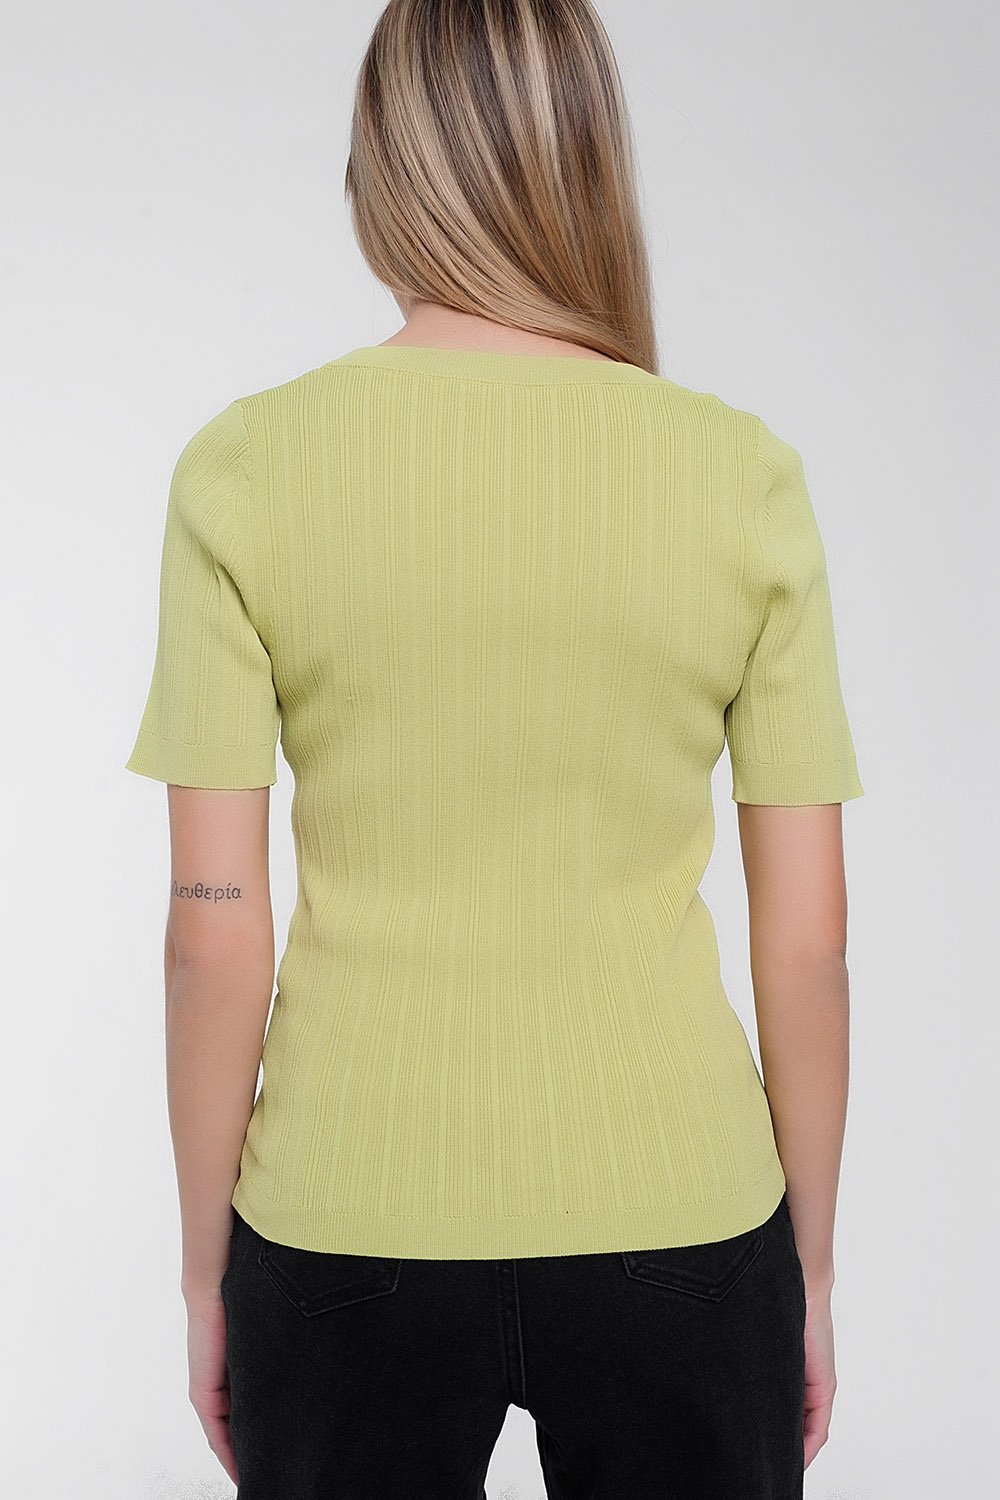 Scoop Neck Jumper with Short Sleeve in Green